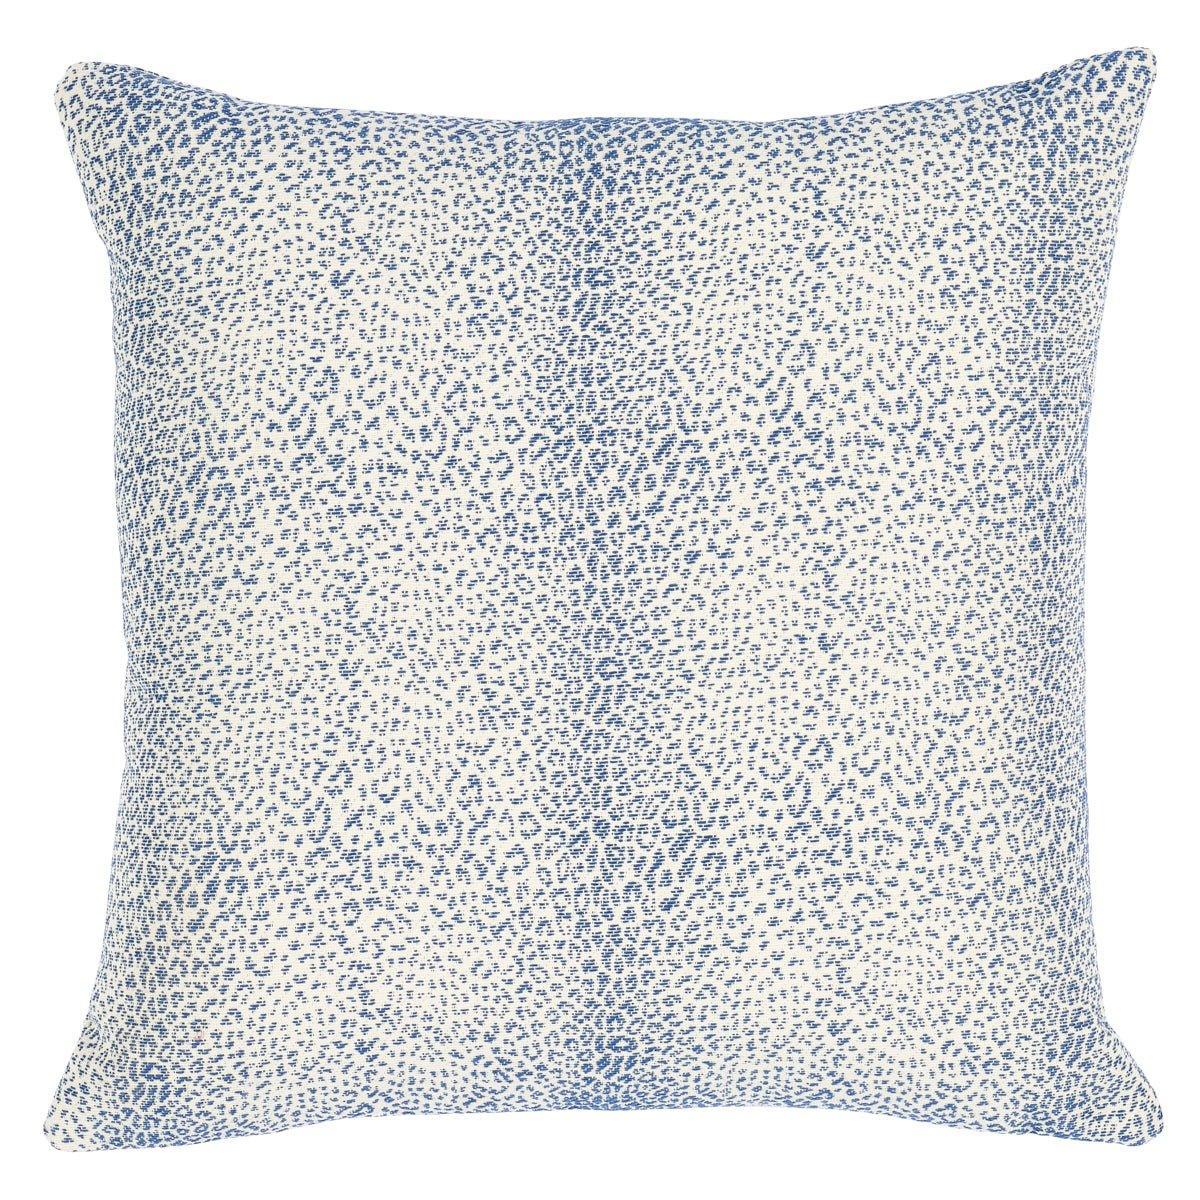 https://www.wellappointedhouse.com/cdn/shop/files/blue-mini-leopard-indoor-outdoor-square-throw-pillow-outdoor-pillows-the-well-appointed-house-1_a66a1013-5898-483a-b28f-639a34874aee.jpg?v=1691691180